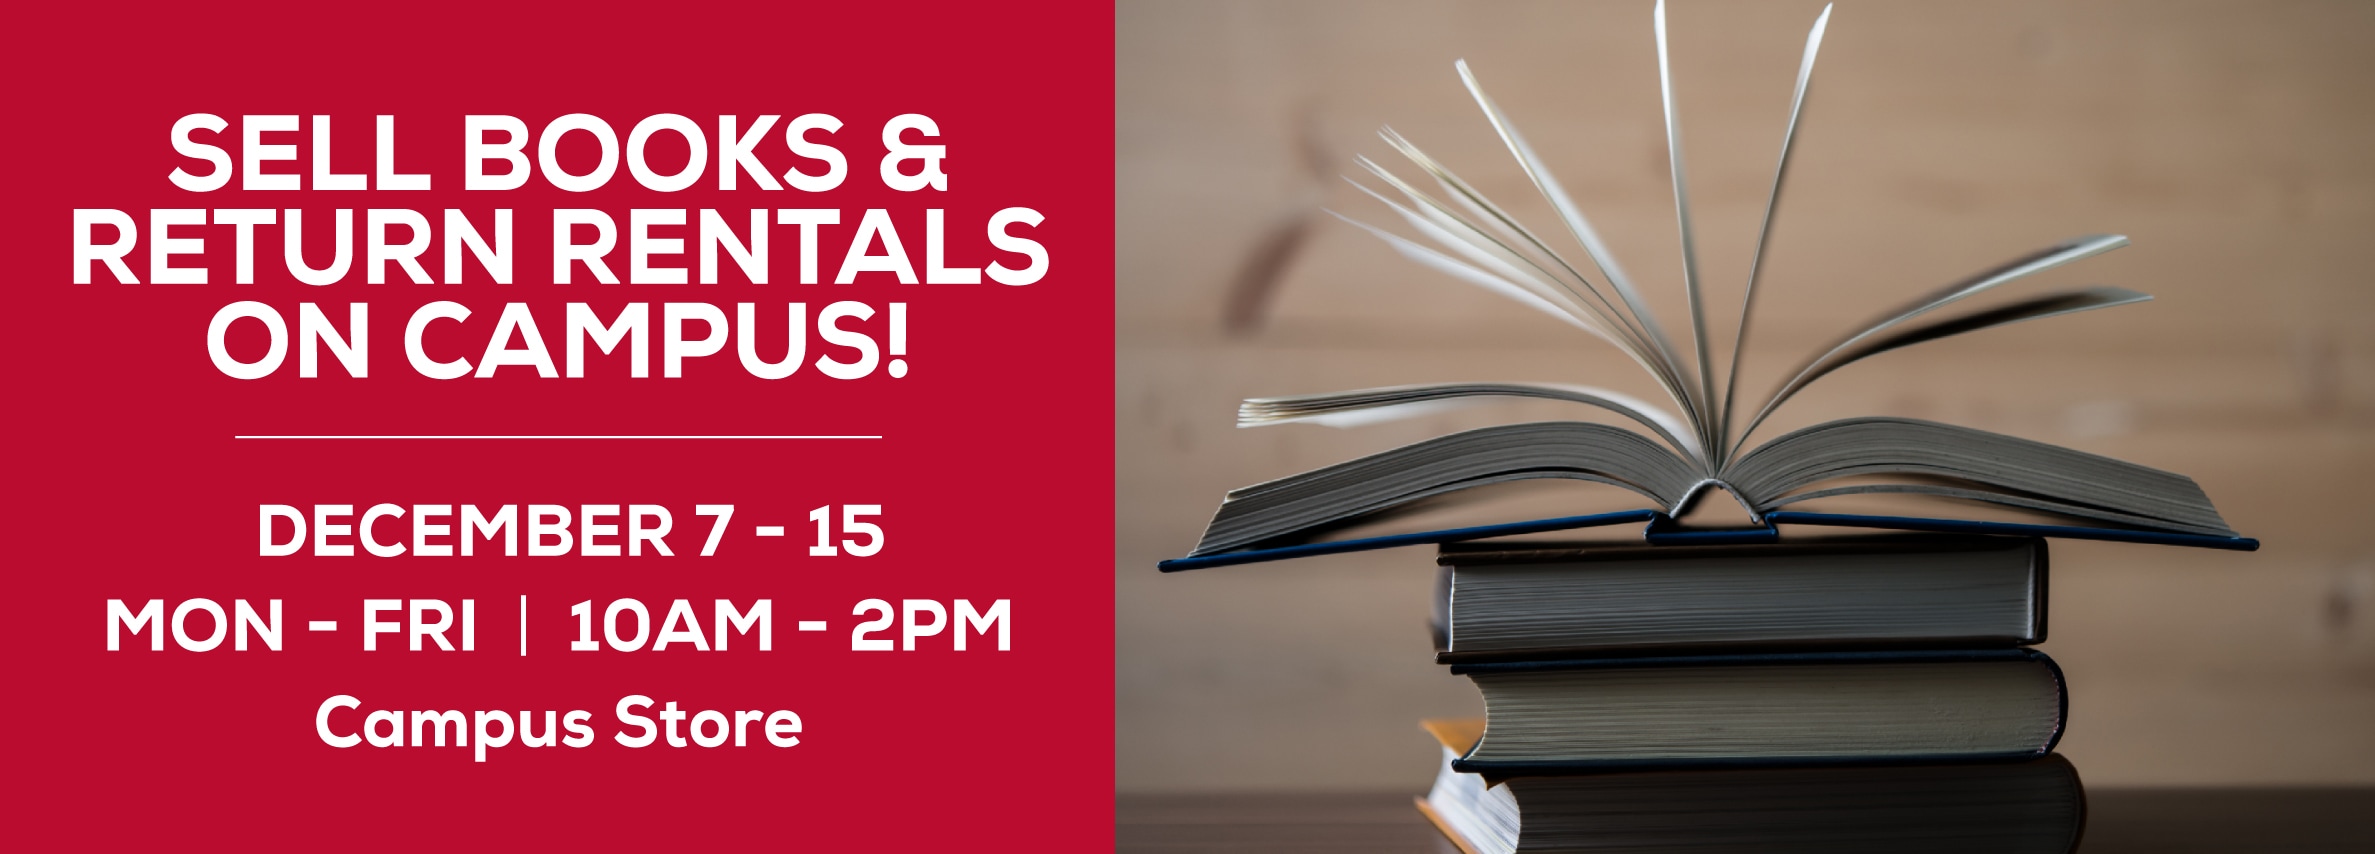 Sell Books & Return Rentals On Campus! 12/ 7 - 12/8 & 12/11 - 12/15 10am-2pm at Campus Store